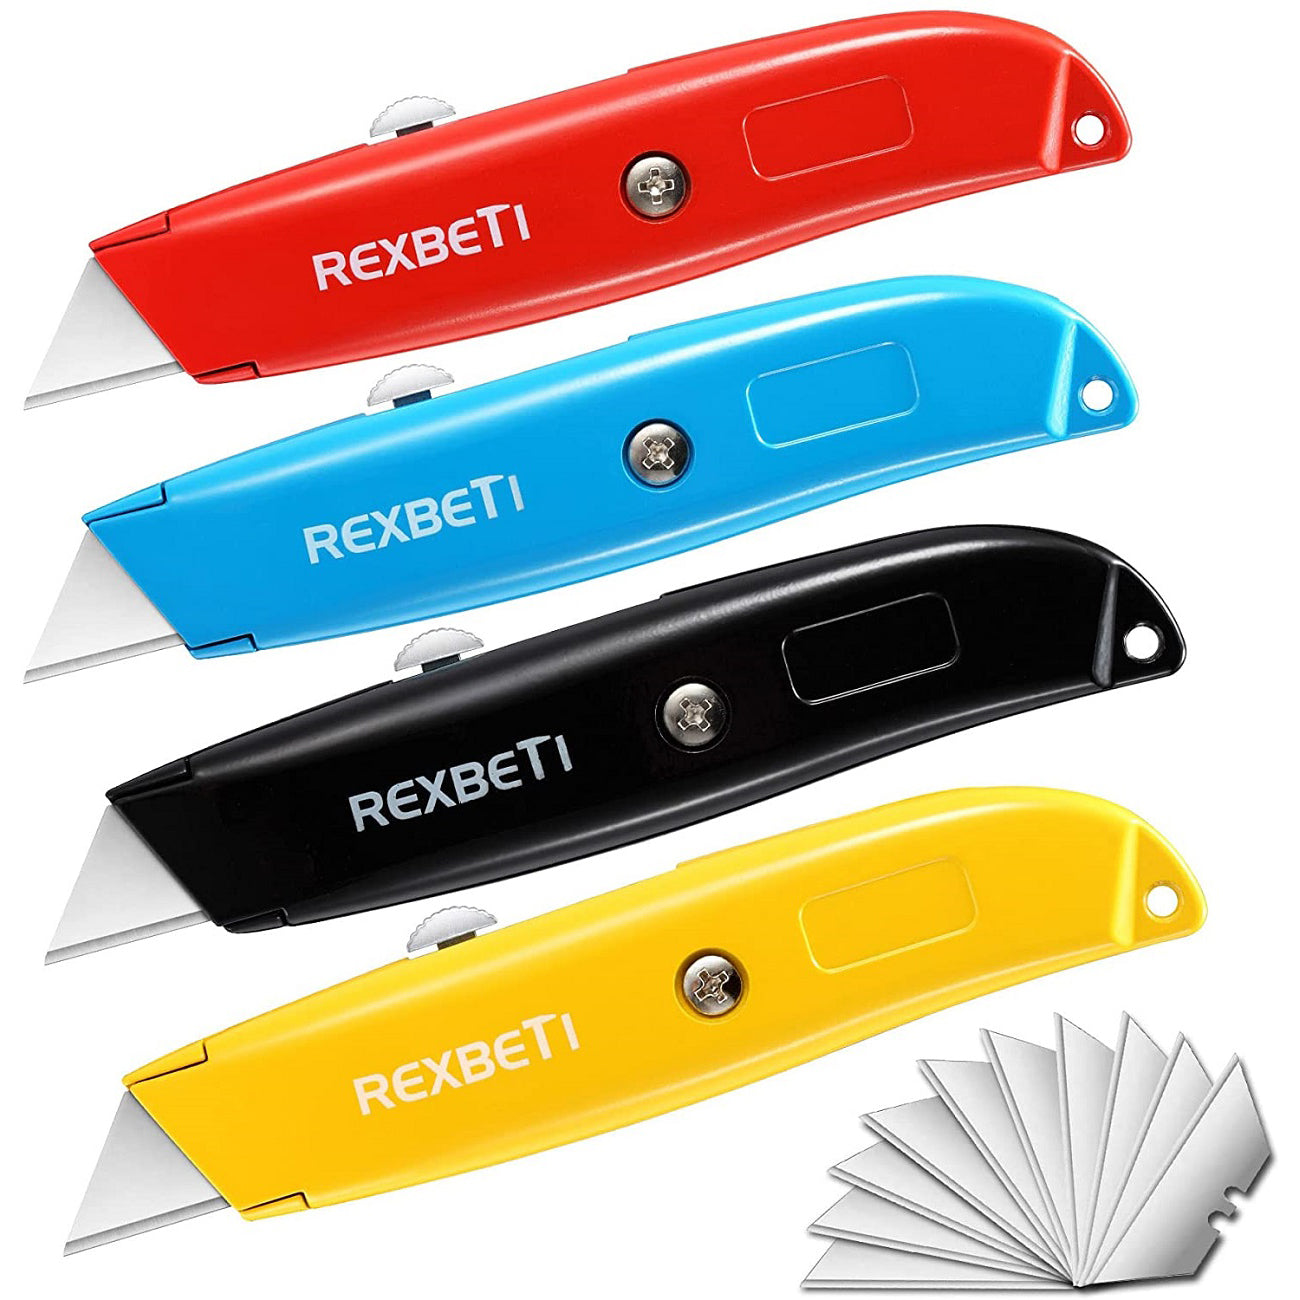 REXBETI 12-Pack Utility Knife, Retractable Box Cutter for Cartons,  Cardboard and Boxes, 18mm Wider Razor Sharp Blade, Smooth Mechanism,  Perfect for